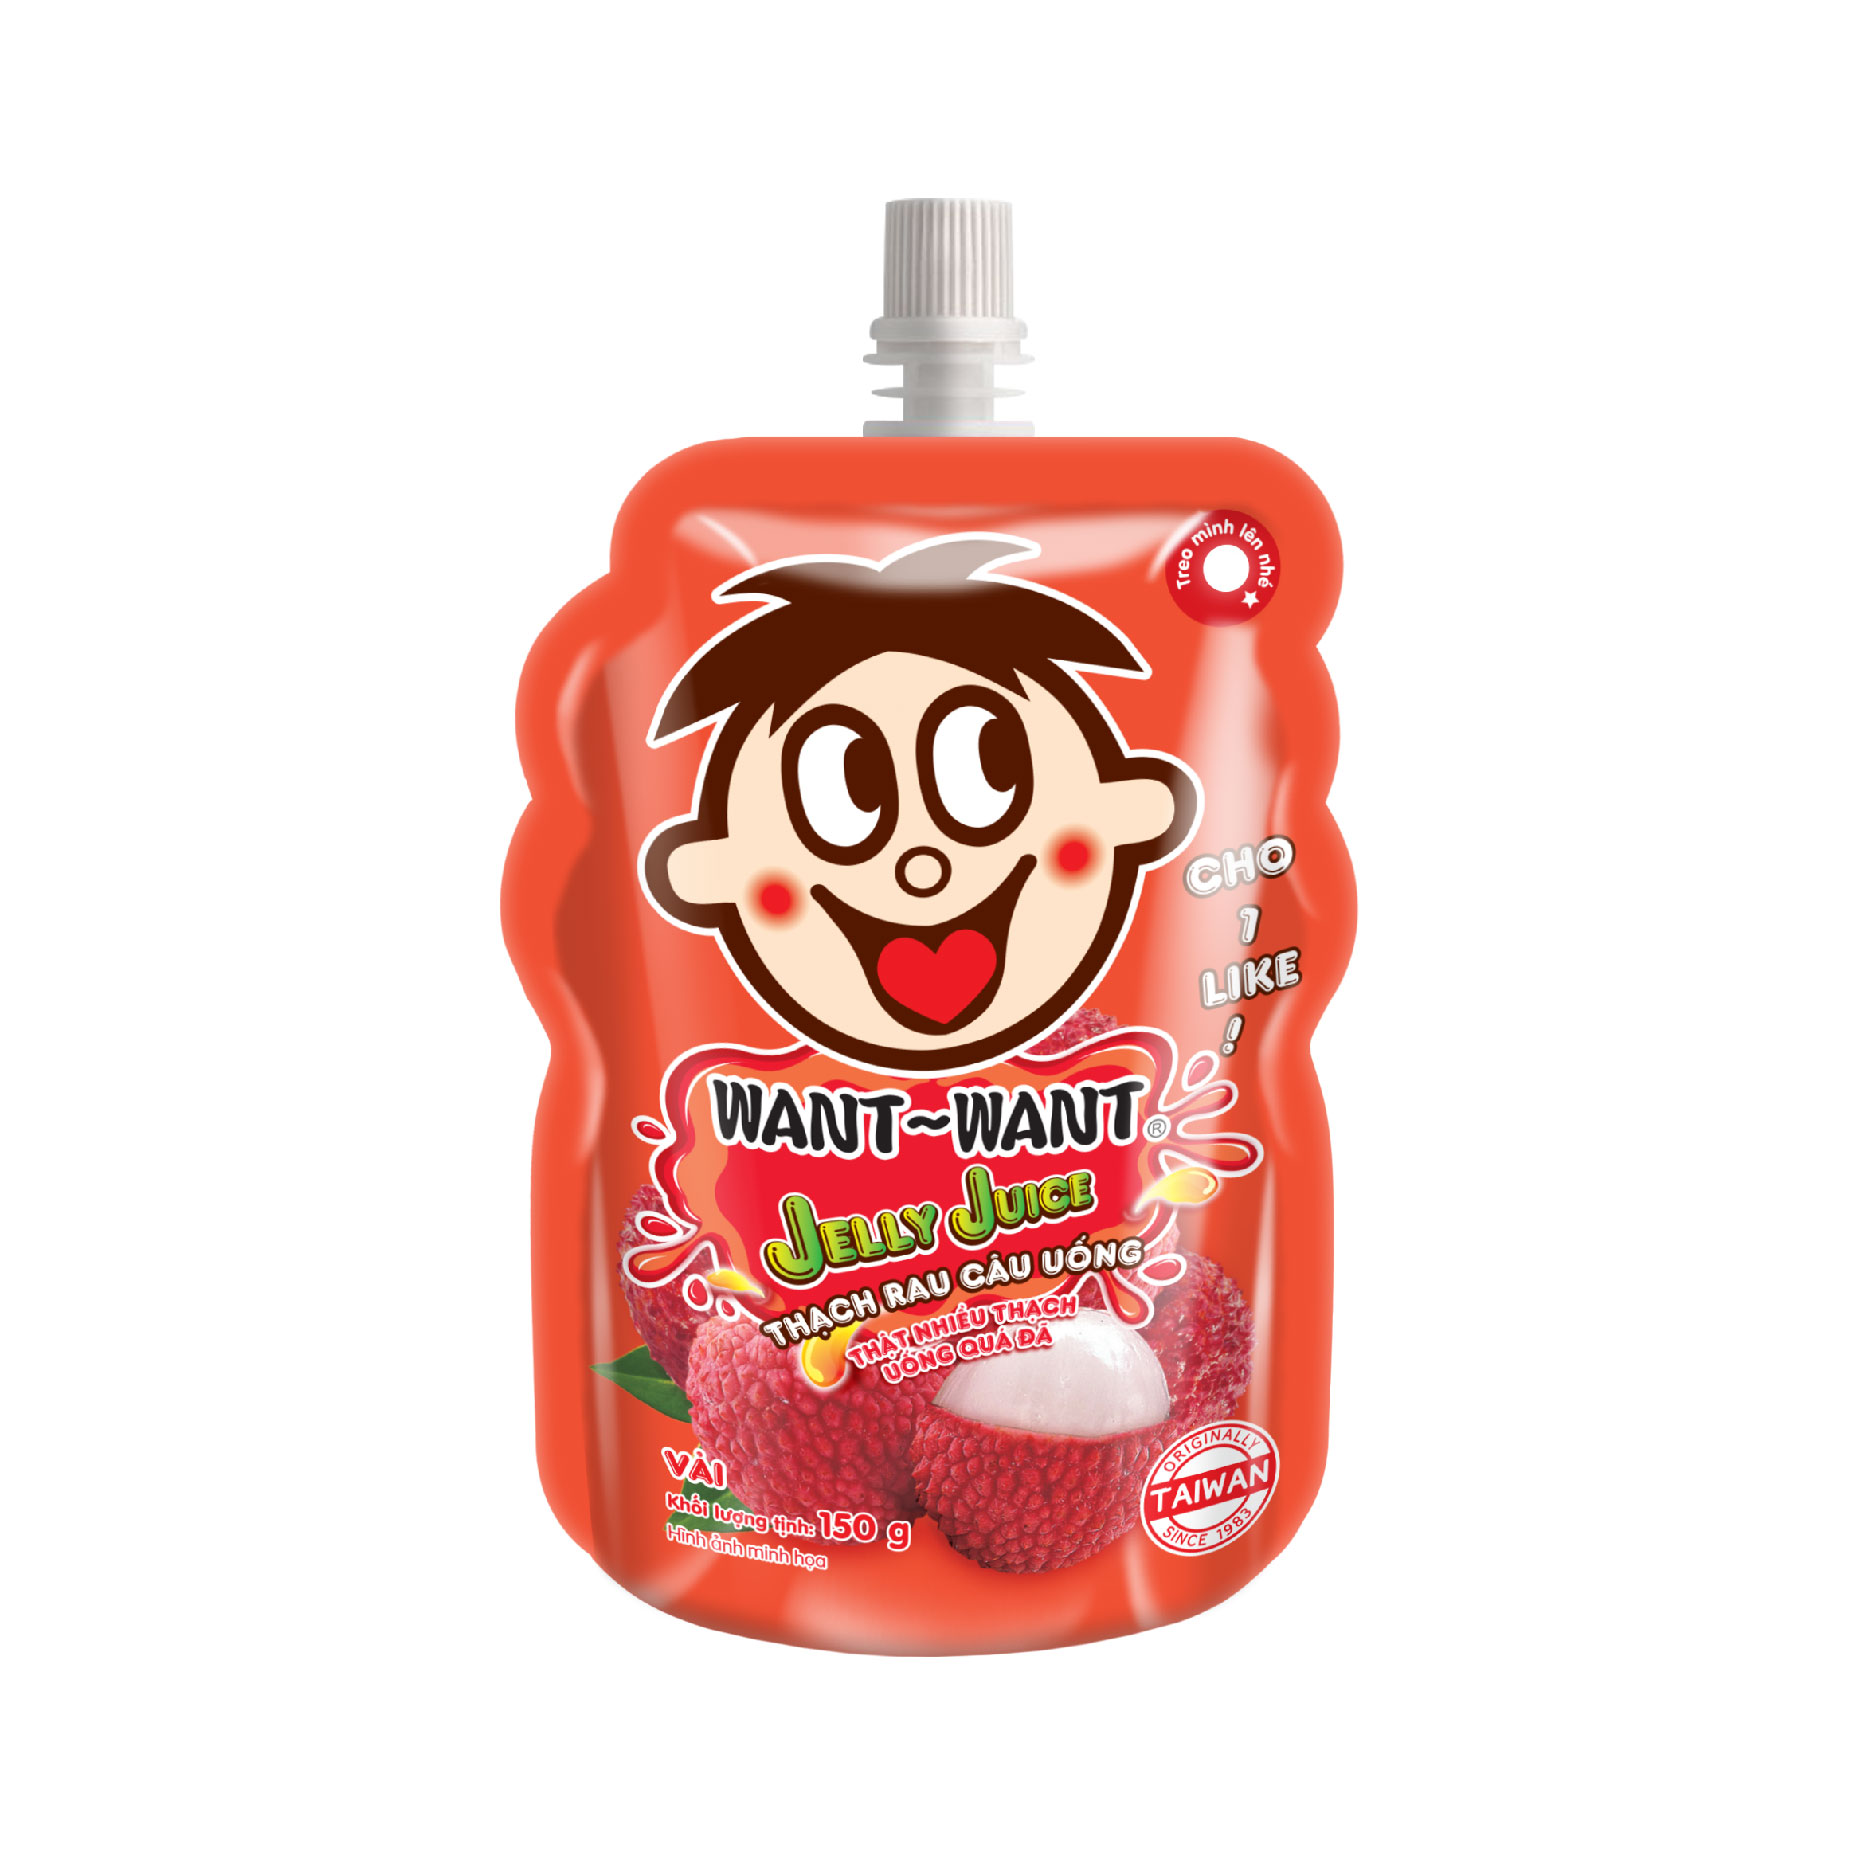 WANT WANT Jelly Juice Rock Sugar Pear Flavor 150g